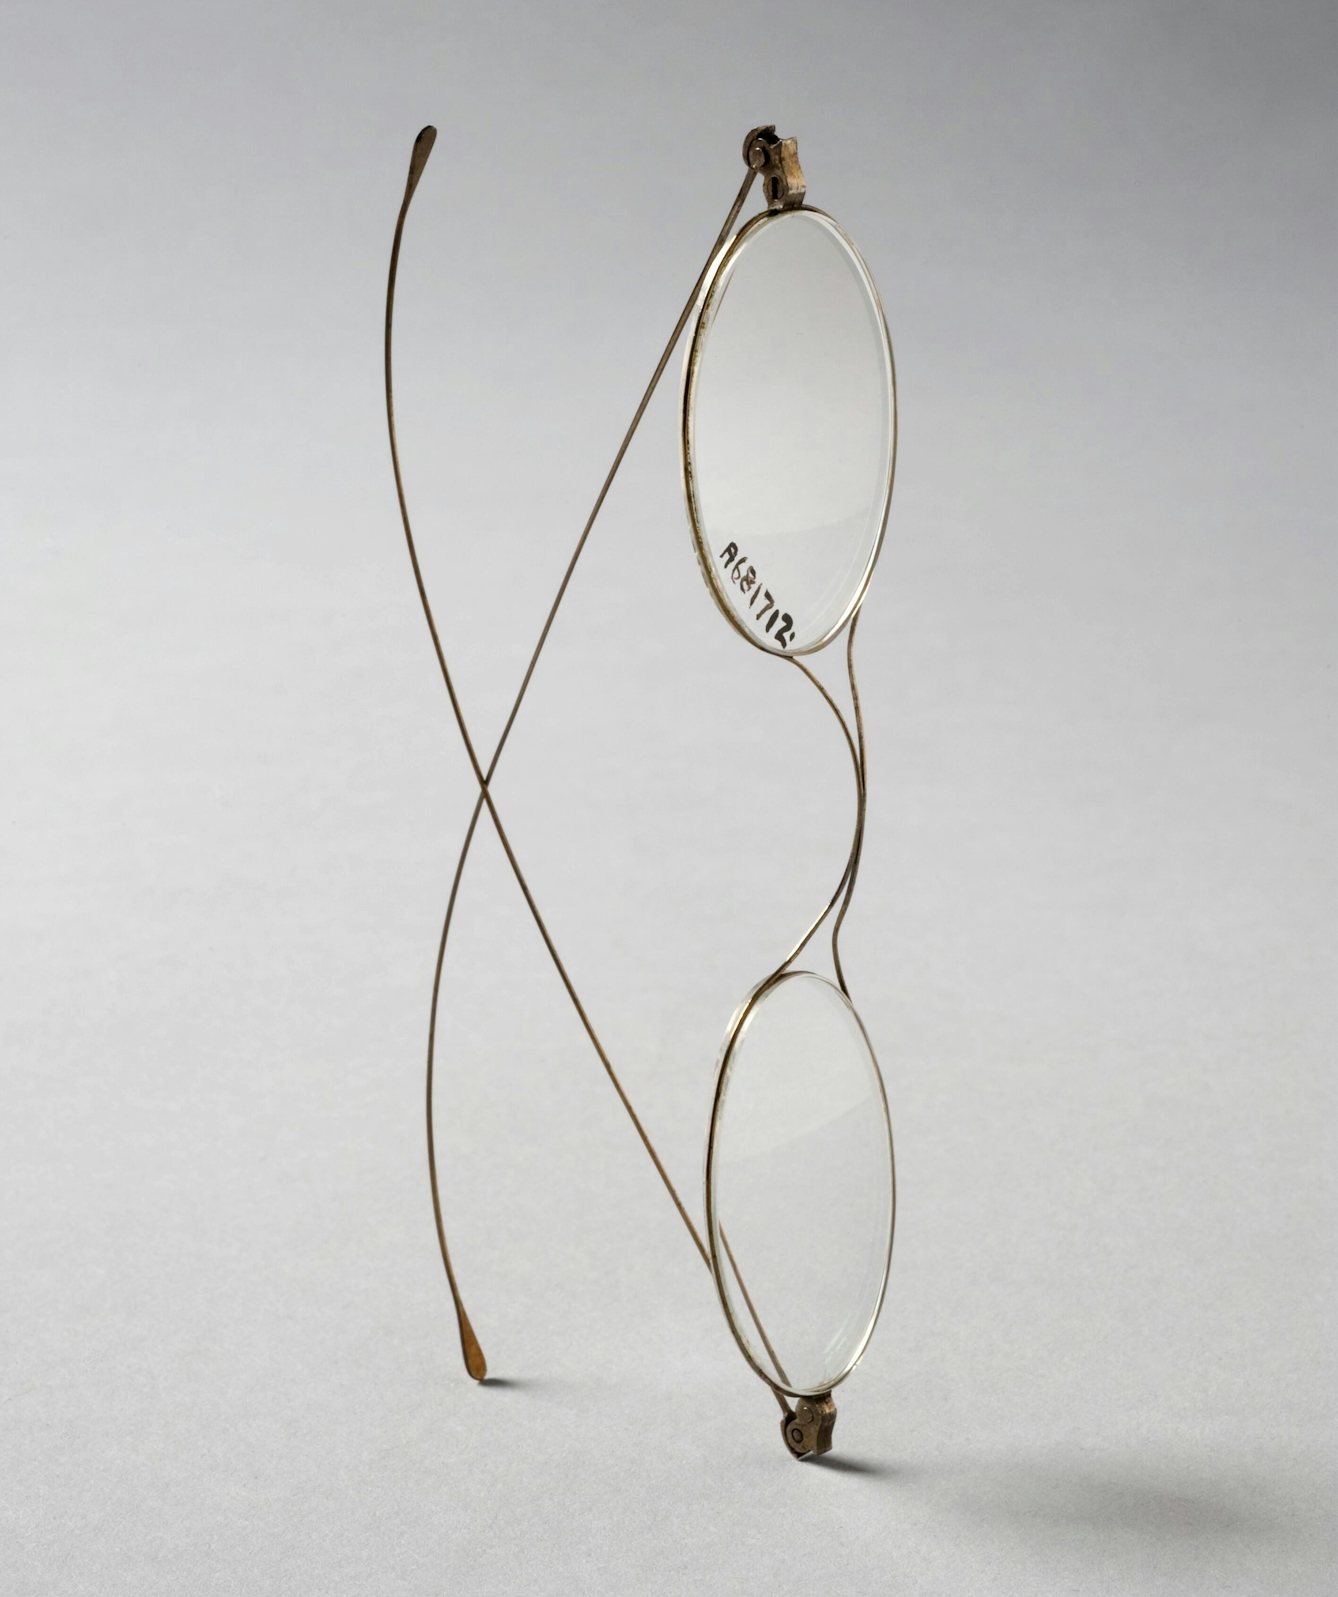 A pair of very thin wire frame spectacles from the 19th century, shown balanced vertically on one arm and one end of the frame and the two arms crossing